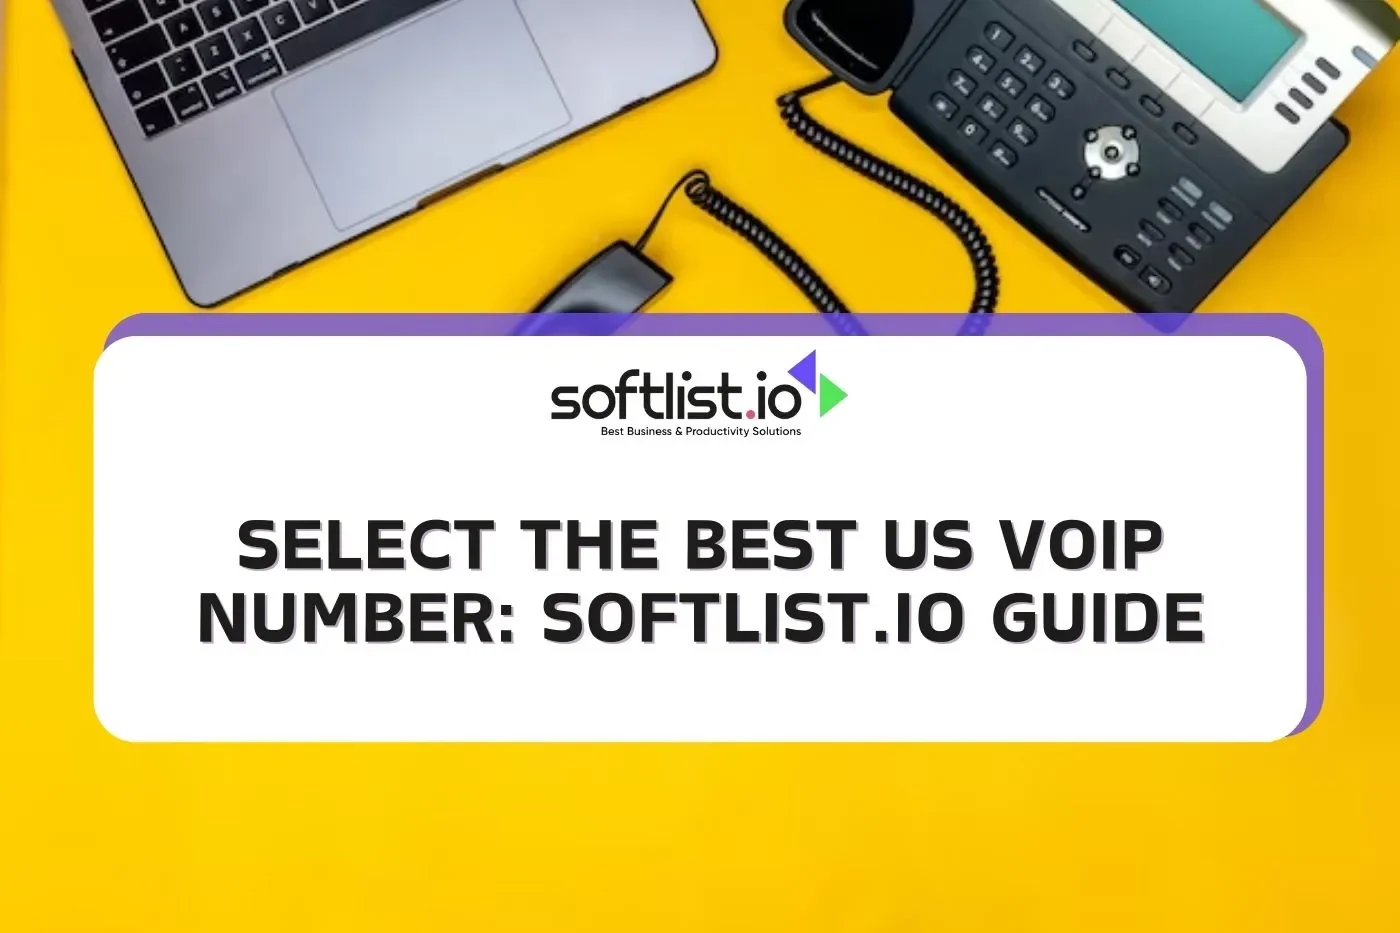 Home Business Communication Made Easy: 27 Best US VoIP Numbers